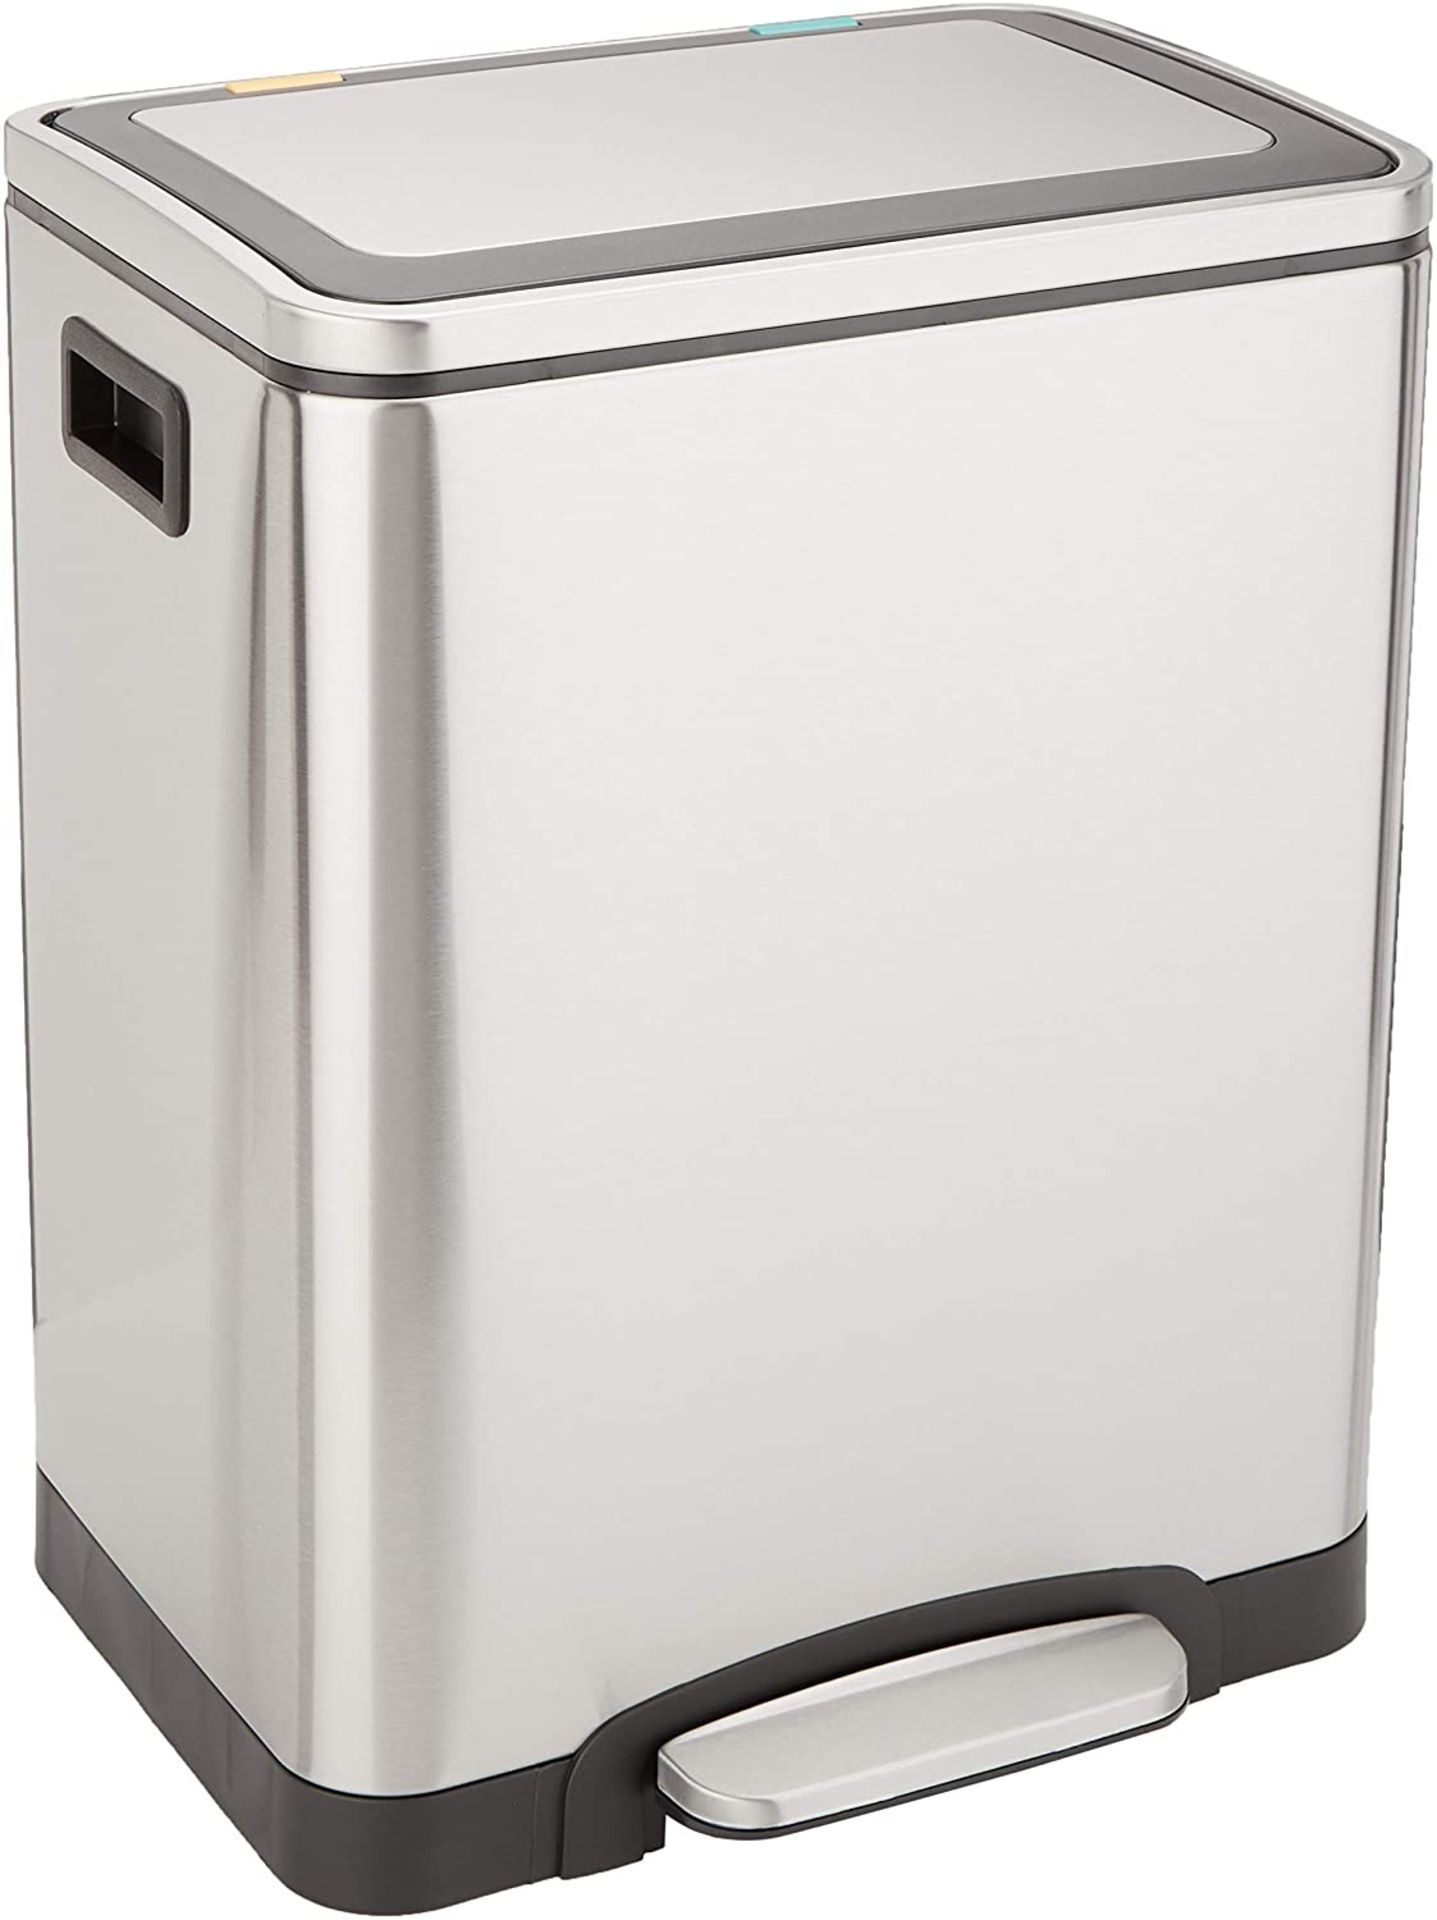 RRP £47 AmazonBasics Stainless Steel Dustbin with Two 15 L Interior Bins - 2x15L